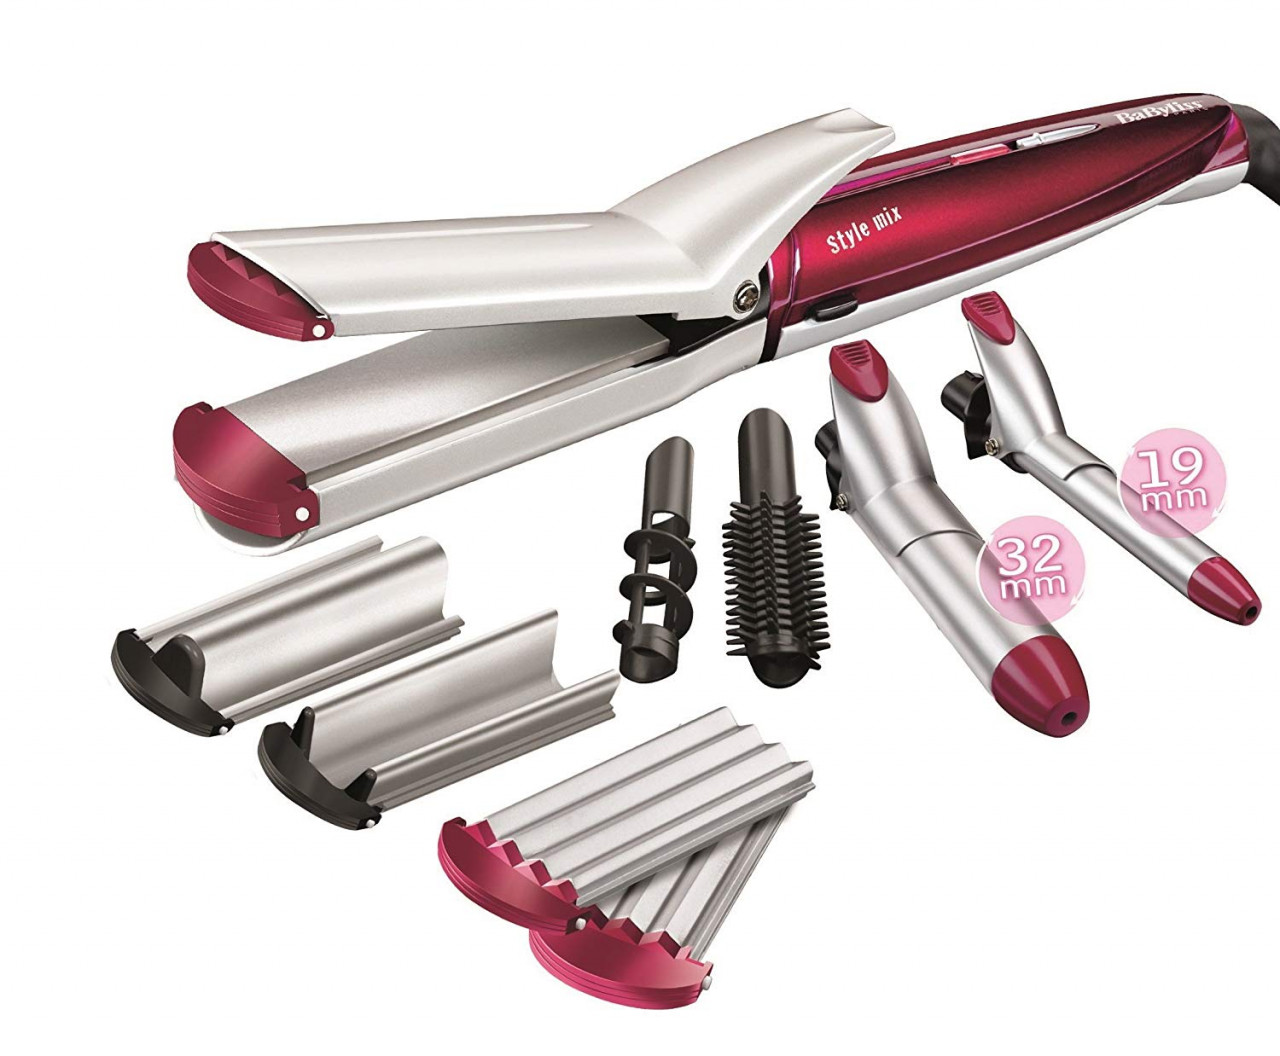 Babyliss MS21E 10 in 1 Hair Styler Price in Pakistan 